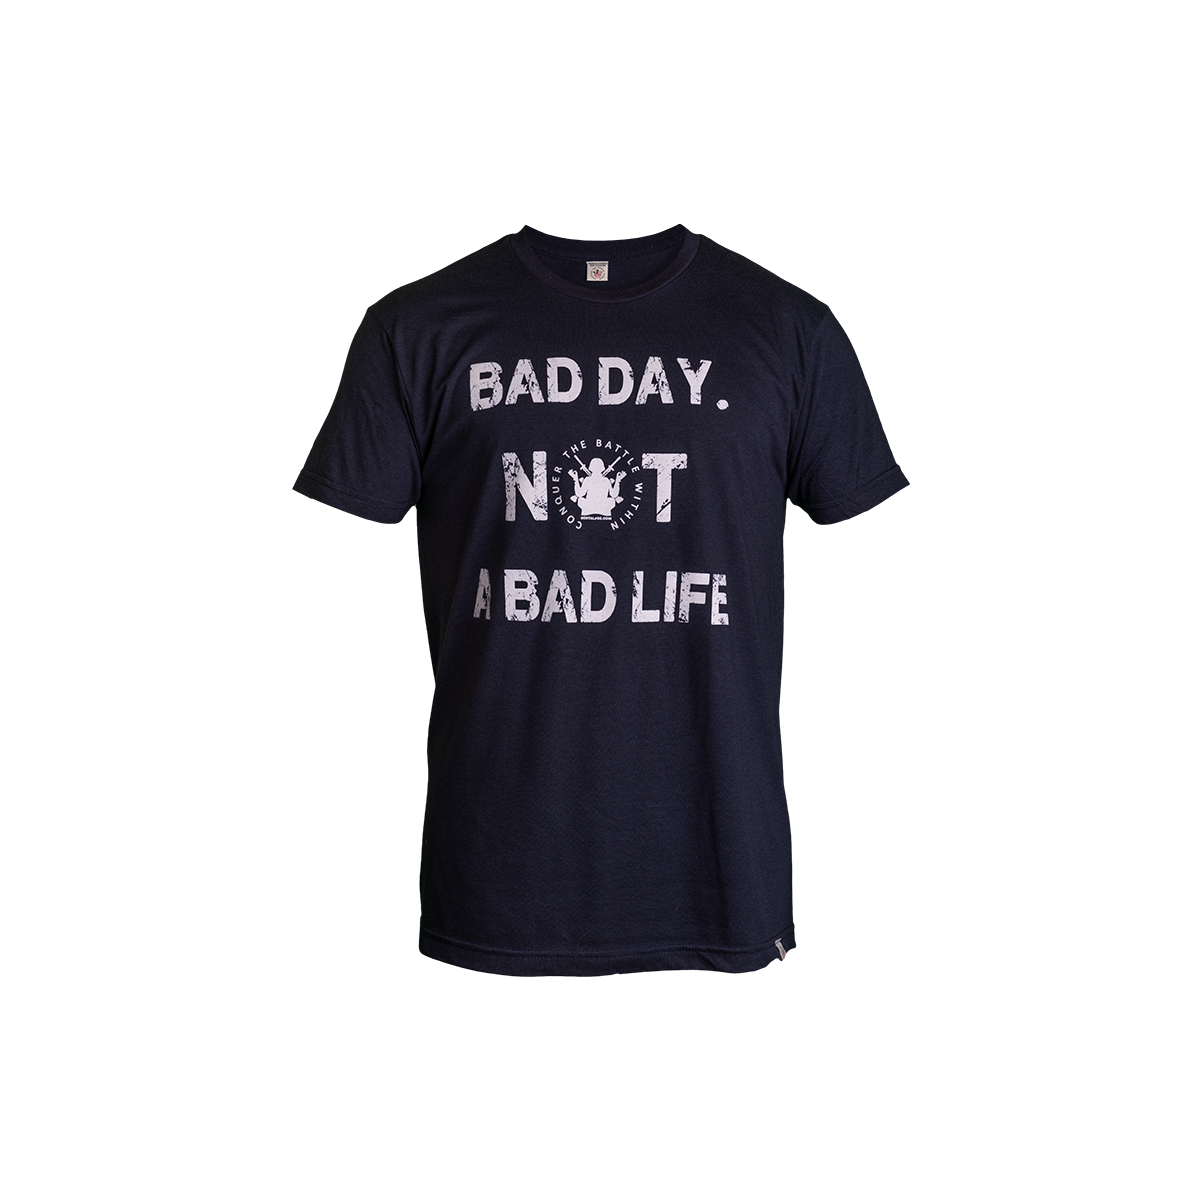 Bad Day, Not Bad Life